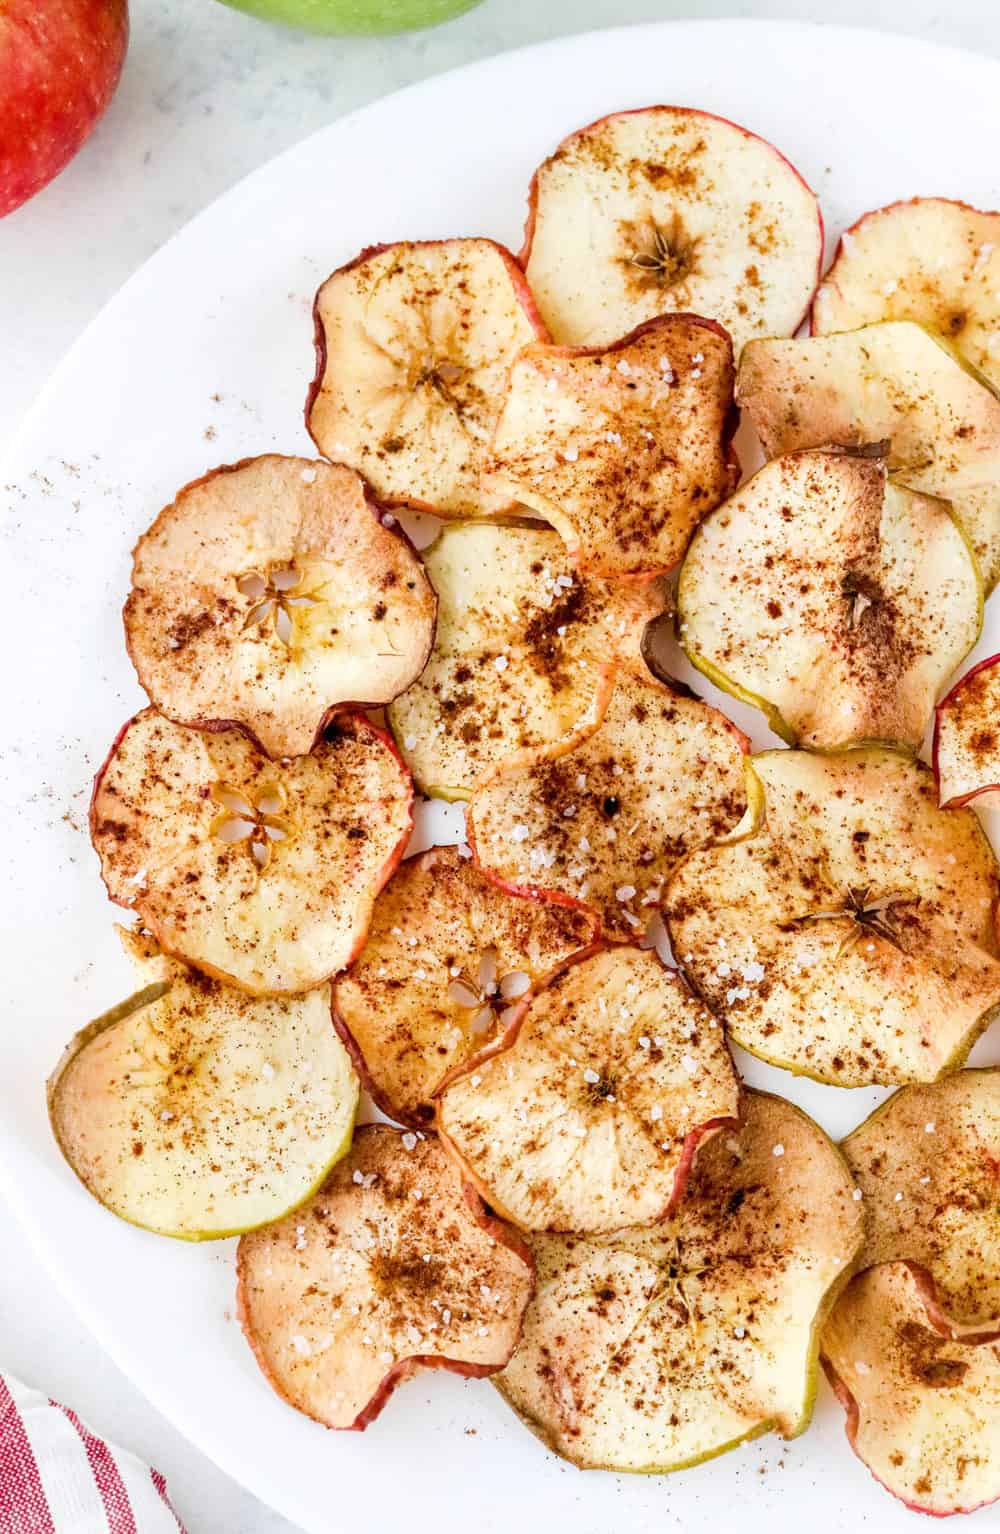 Crispy air fryer apple chips sprinkled with cinnamon and seas salt spread out on a round white plate